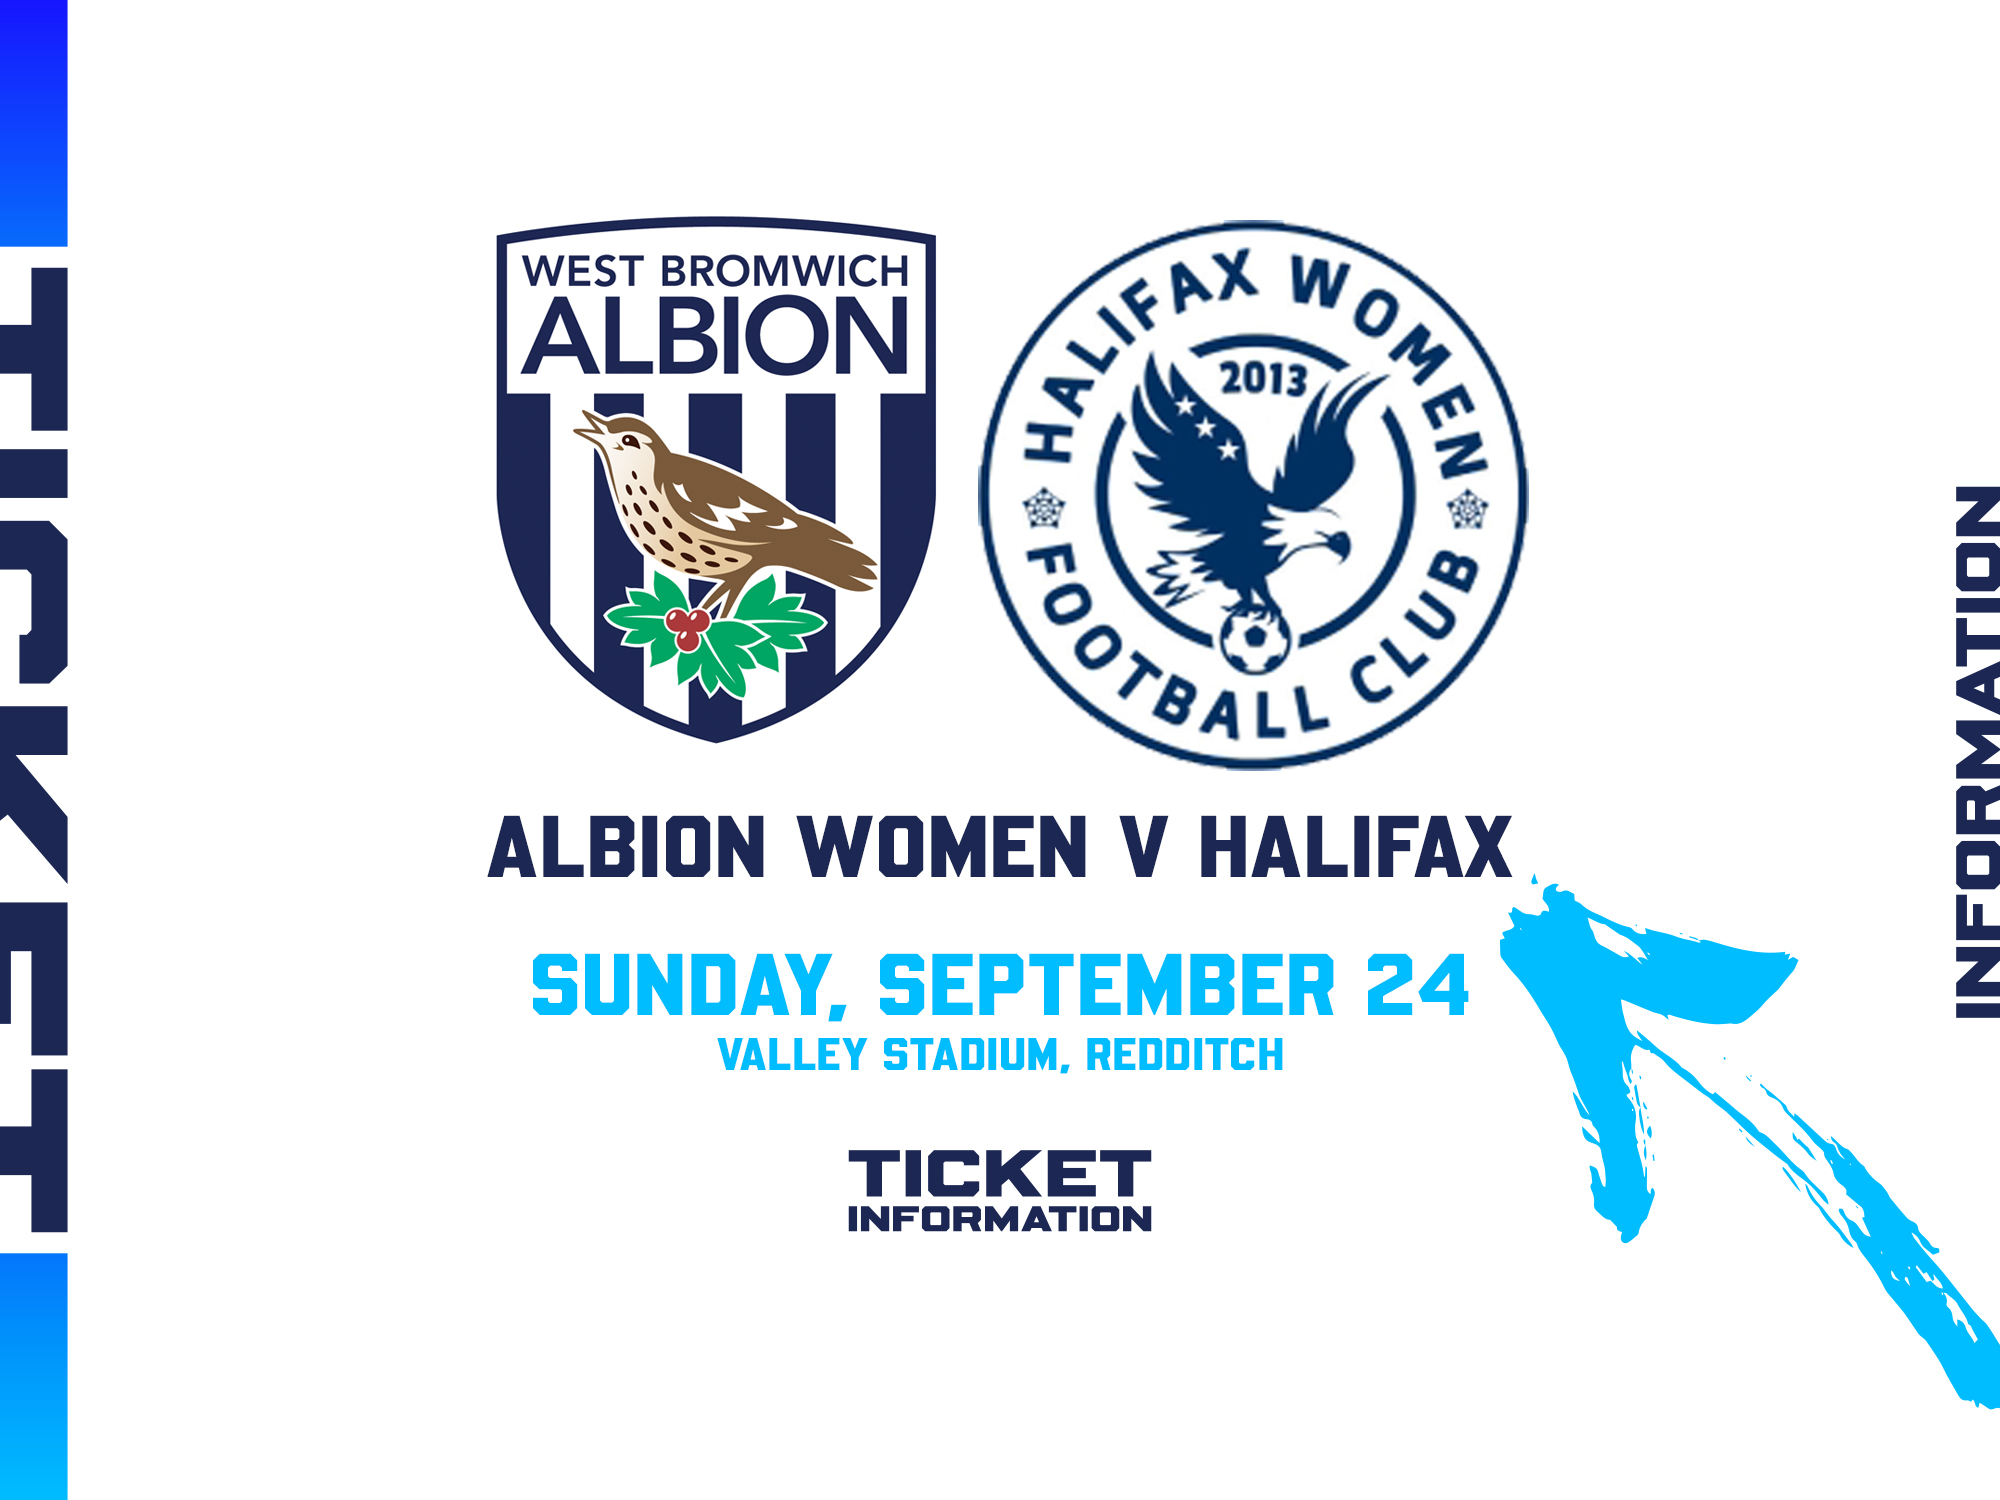 A ticket graphic displaying information for Albion Women's game against Halifax